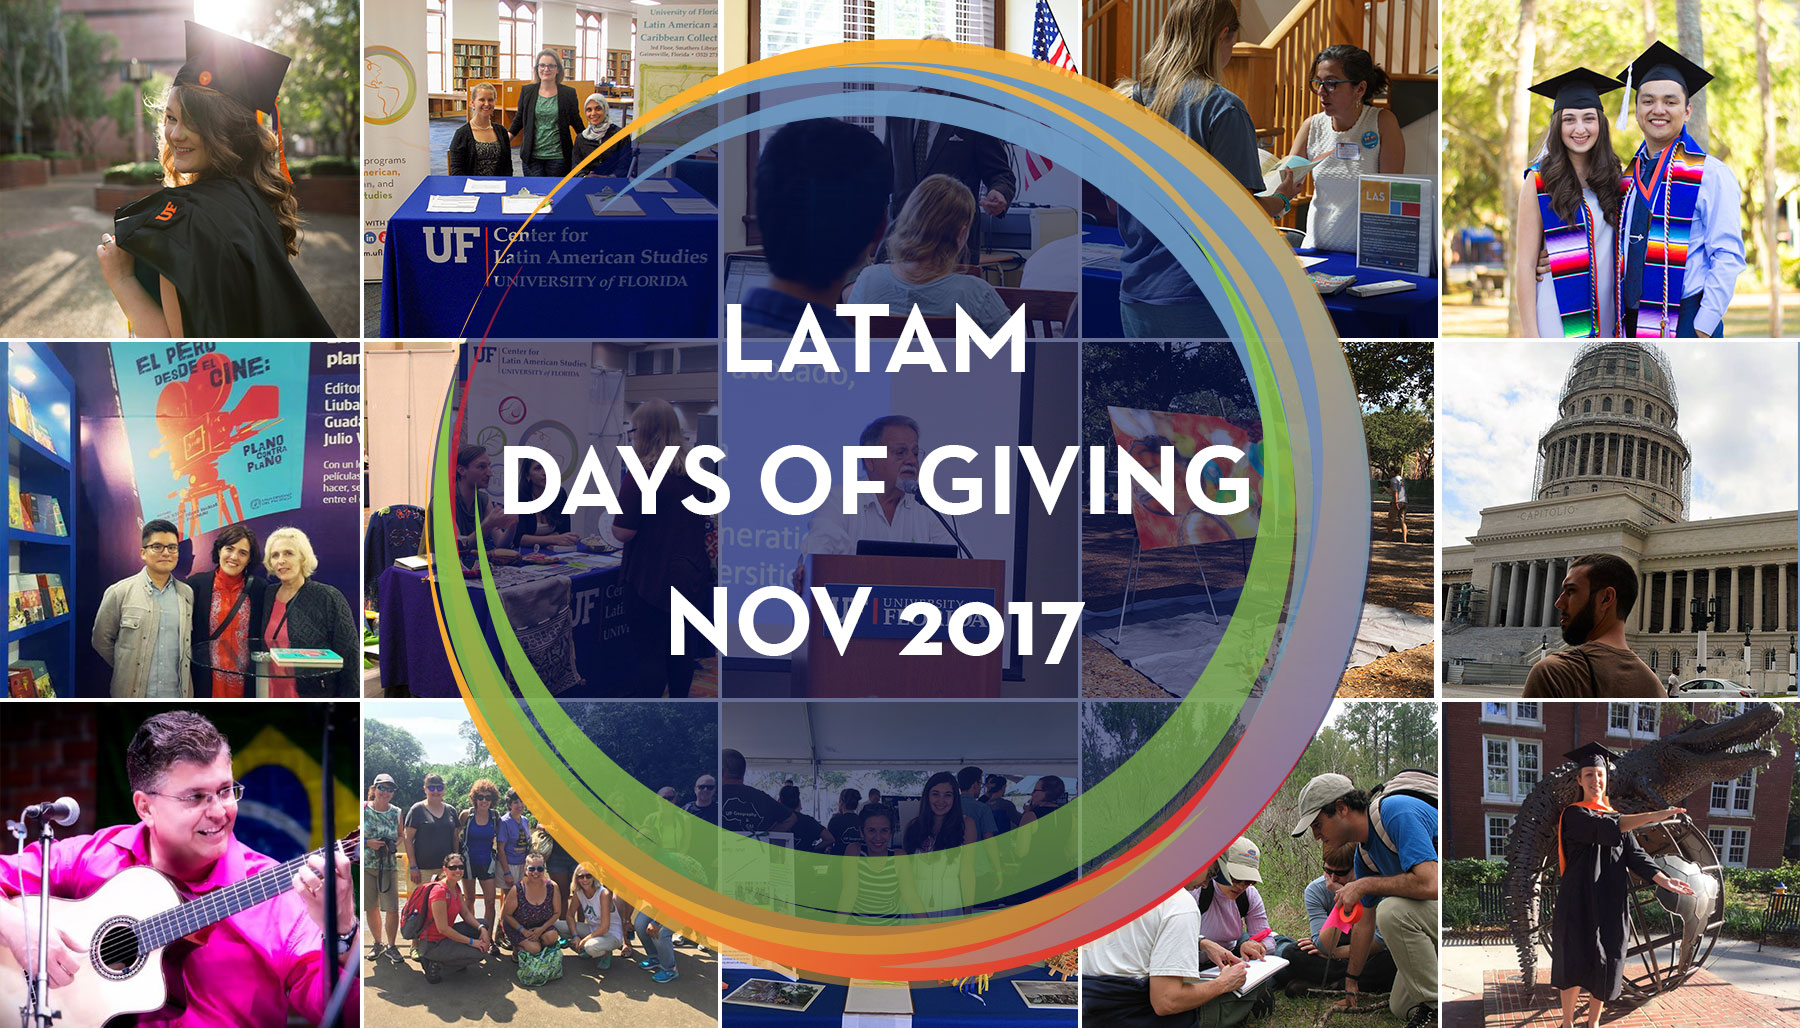 Join the LATAM Days of Giving Campaign